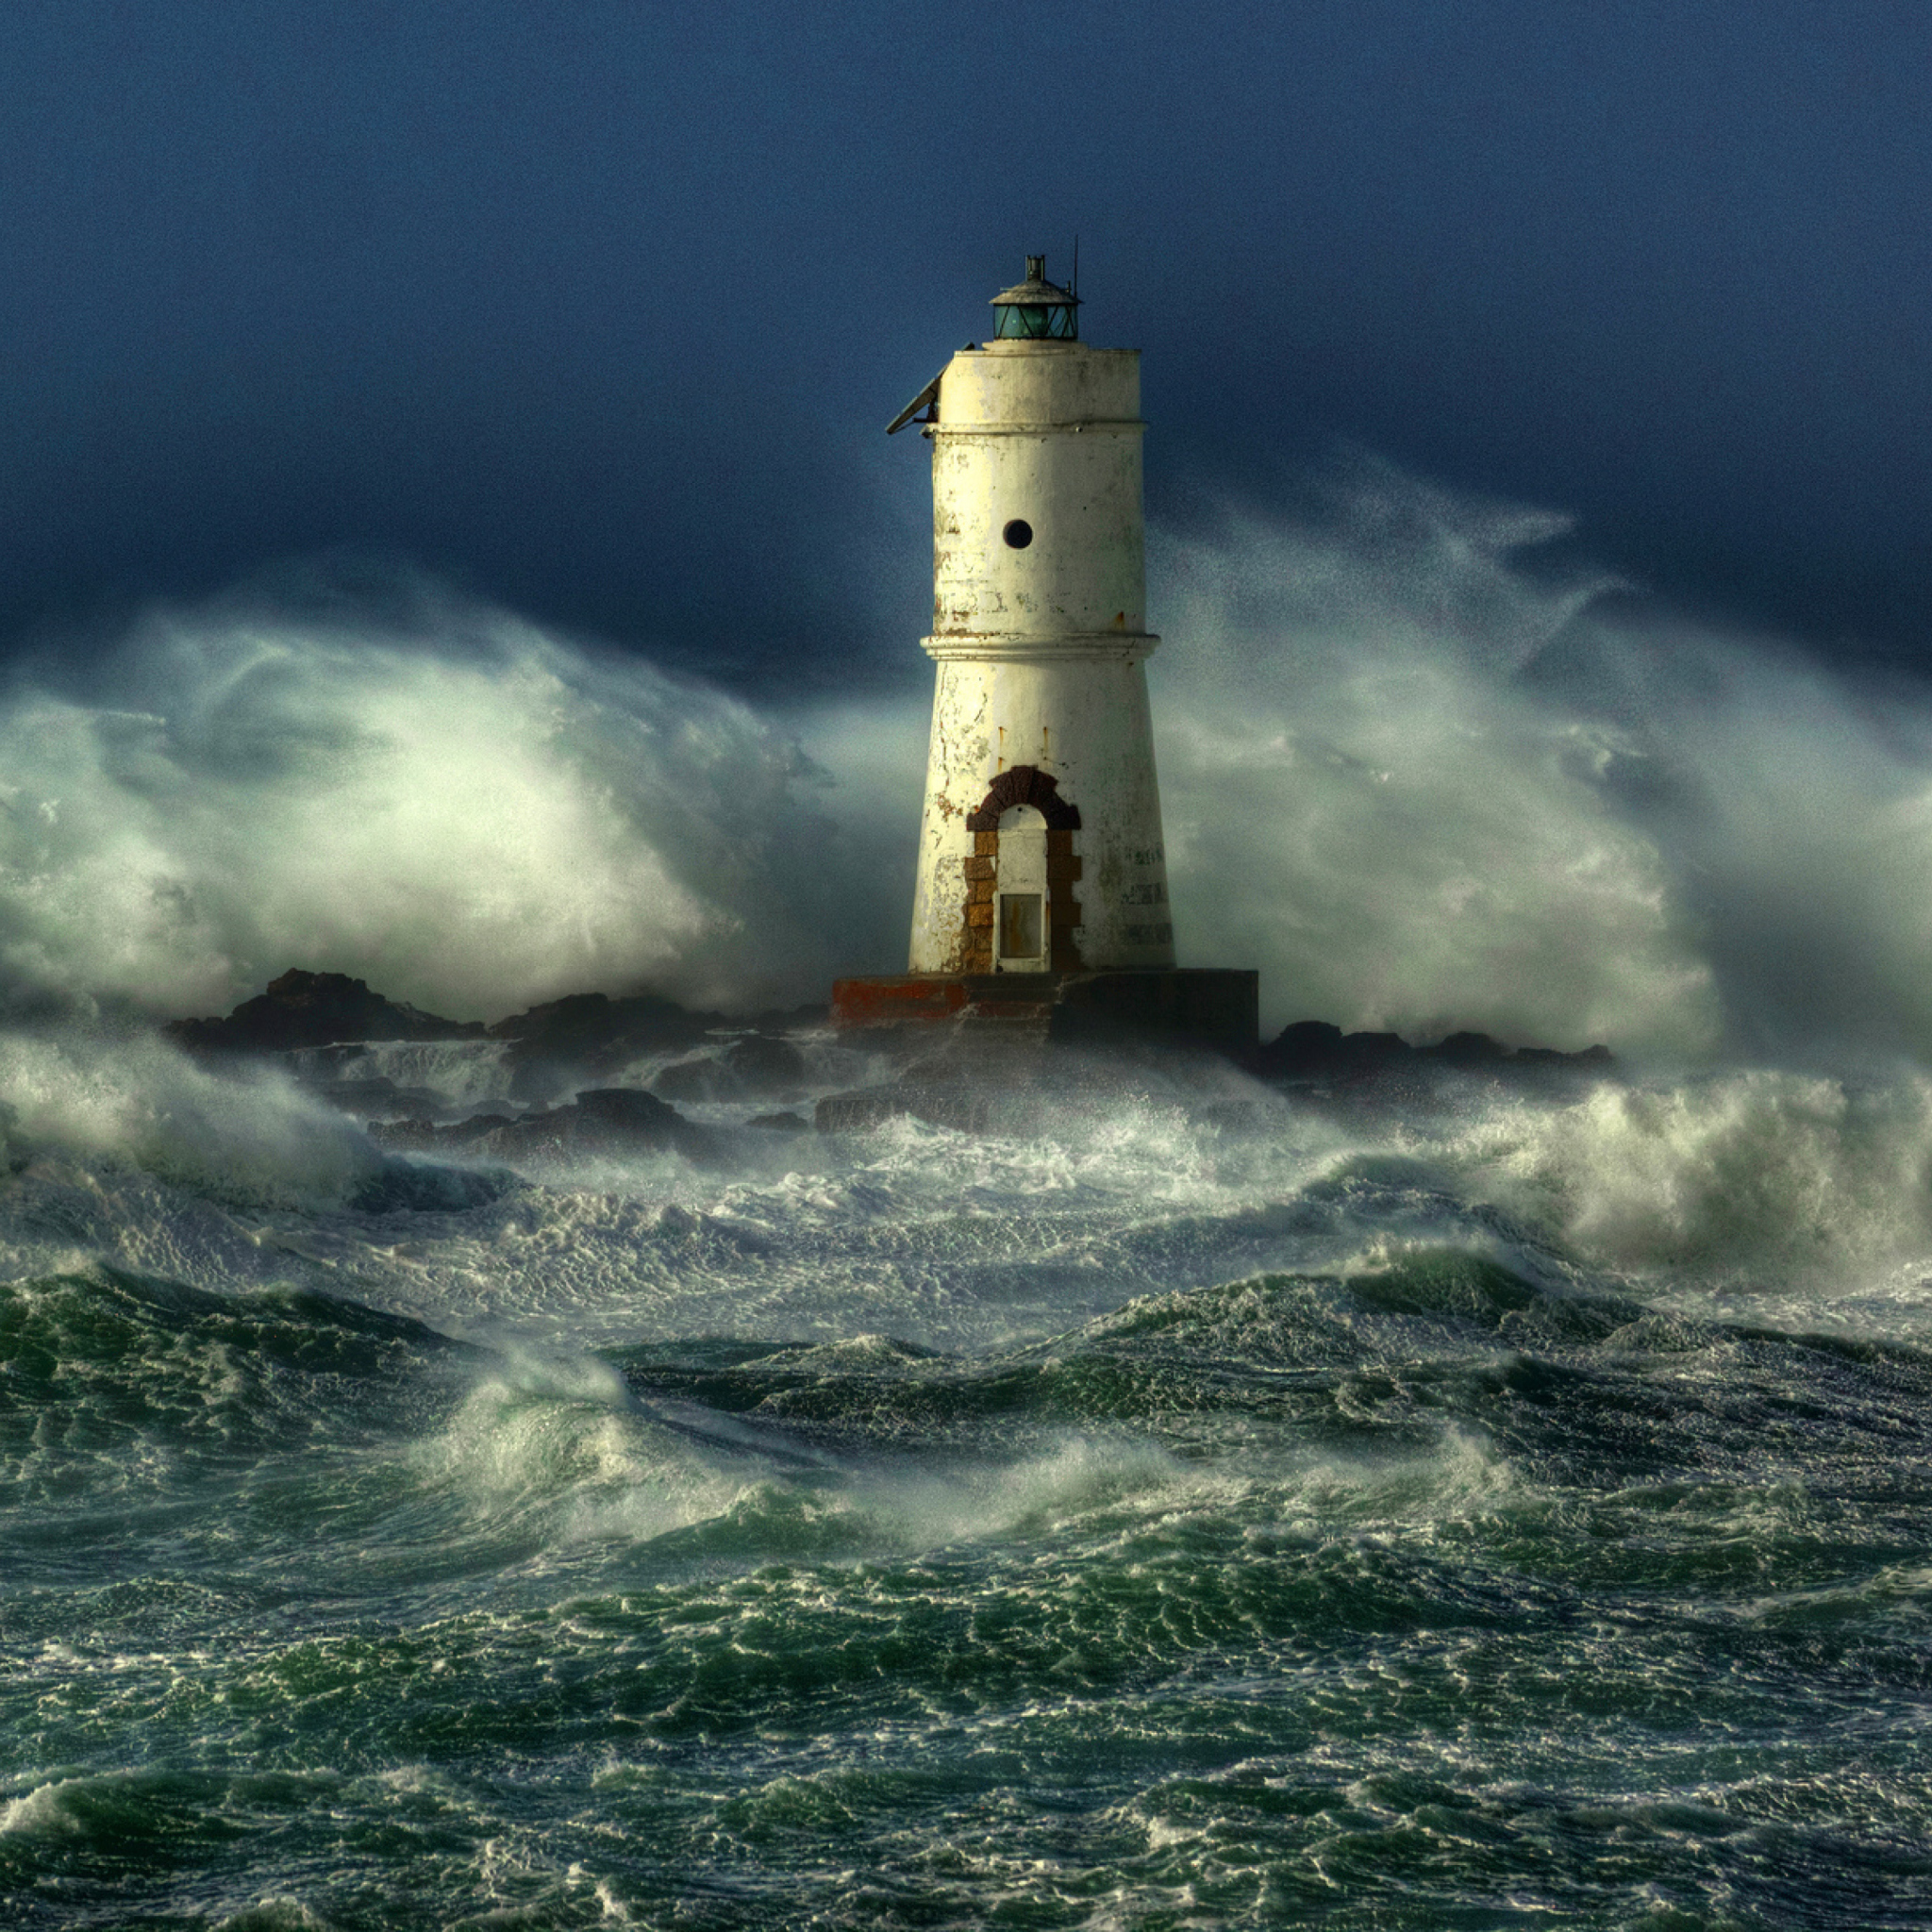 Ocean Storm And Lonely Lighthouse wallpaper 2048x2048